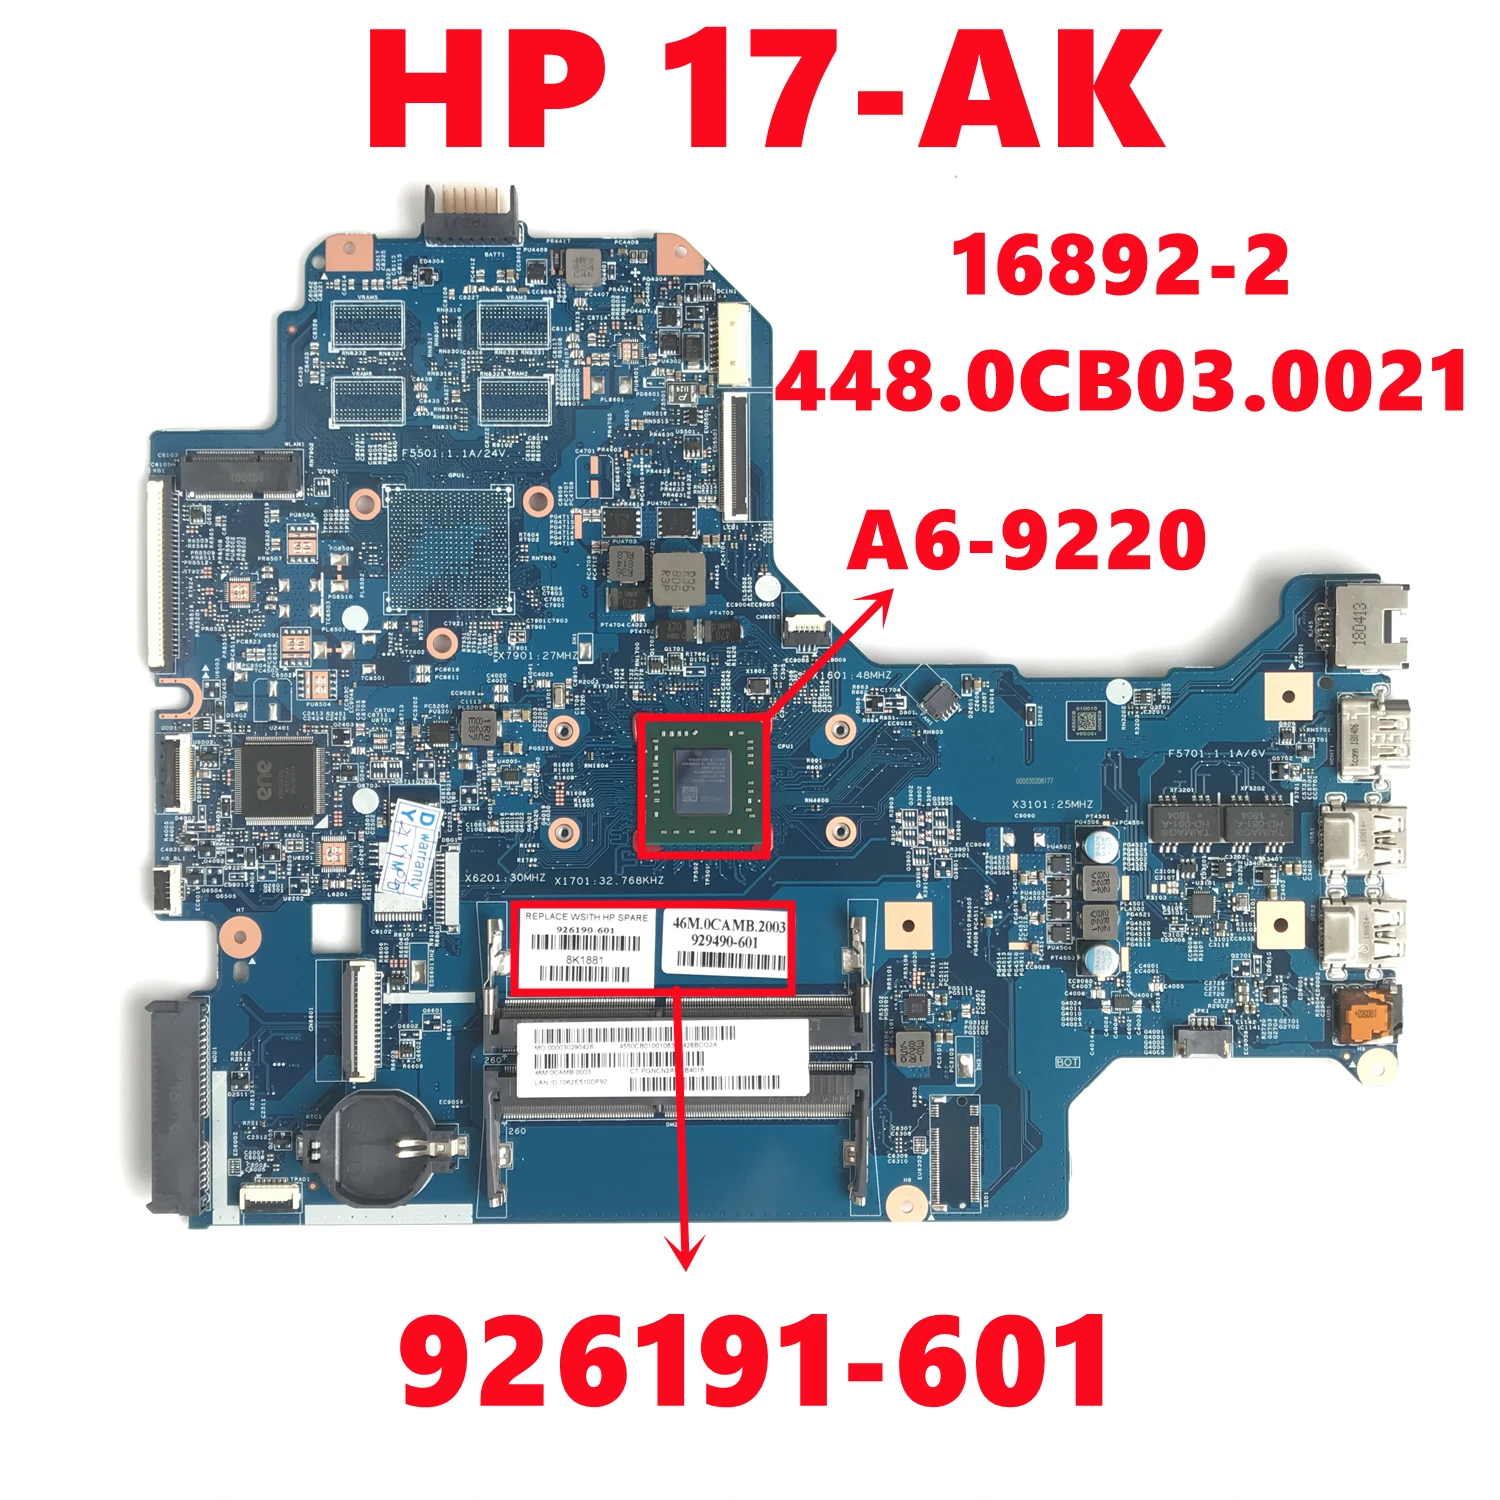 926191-601 926191-501 926191-001 Mainboard For HP 17-AK Laptop Motherboard 16892-2 448.0CB03.0021 With A6-9220 DDR4 100% Test OK